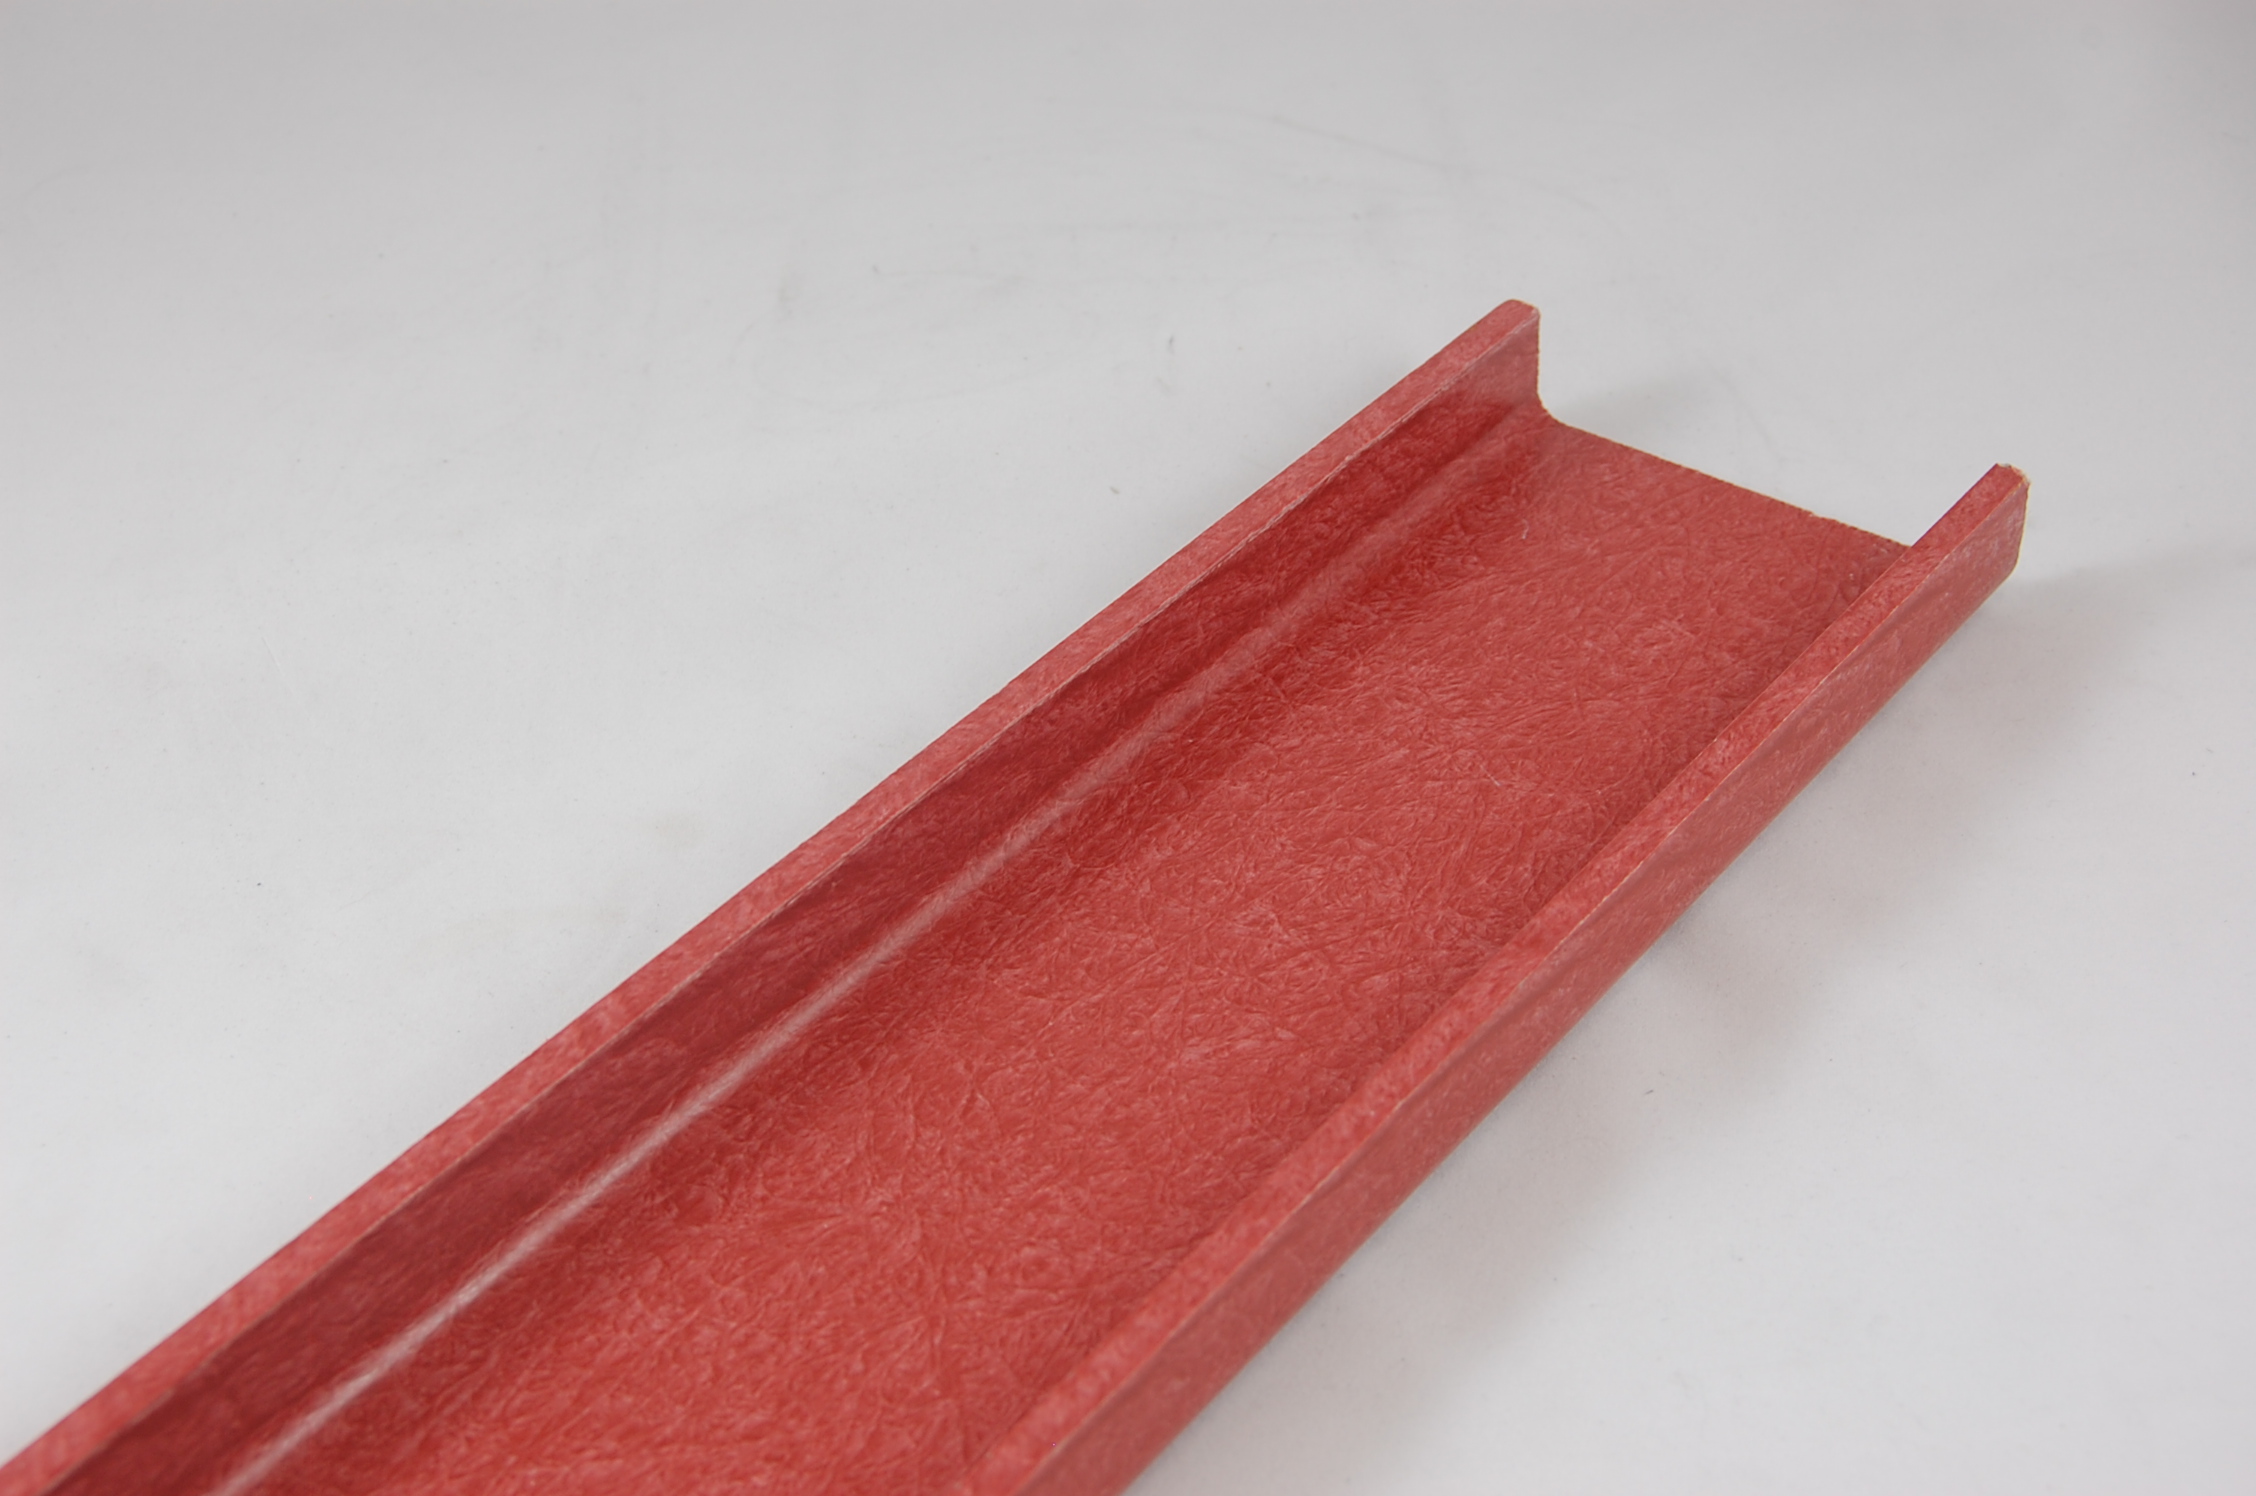 4"W x 1 3/8" Leg x 3/16" thick GLASROD® Grade 1130 Fiberglass-Reinforced Polyester Laminate Channel, red,  120"L channel